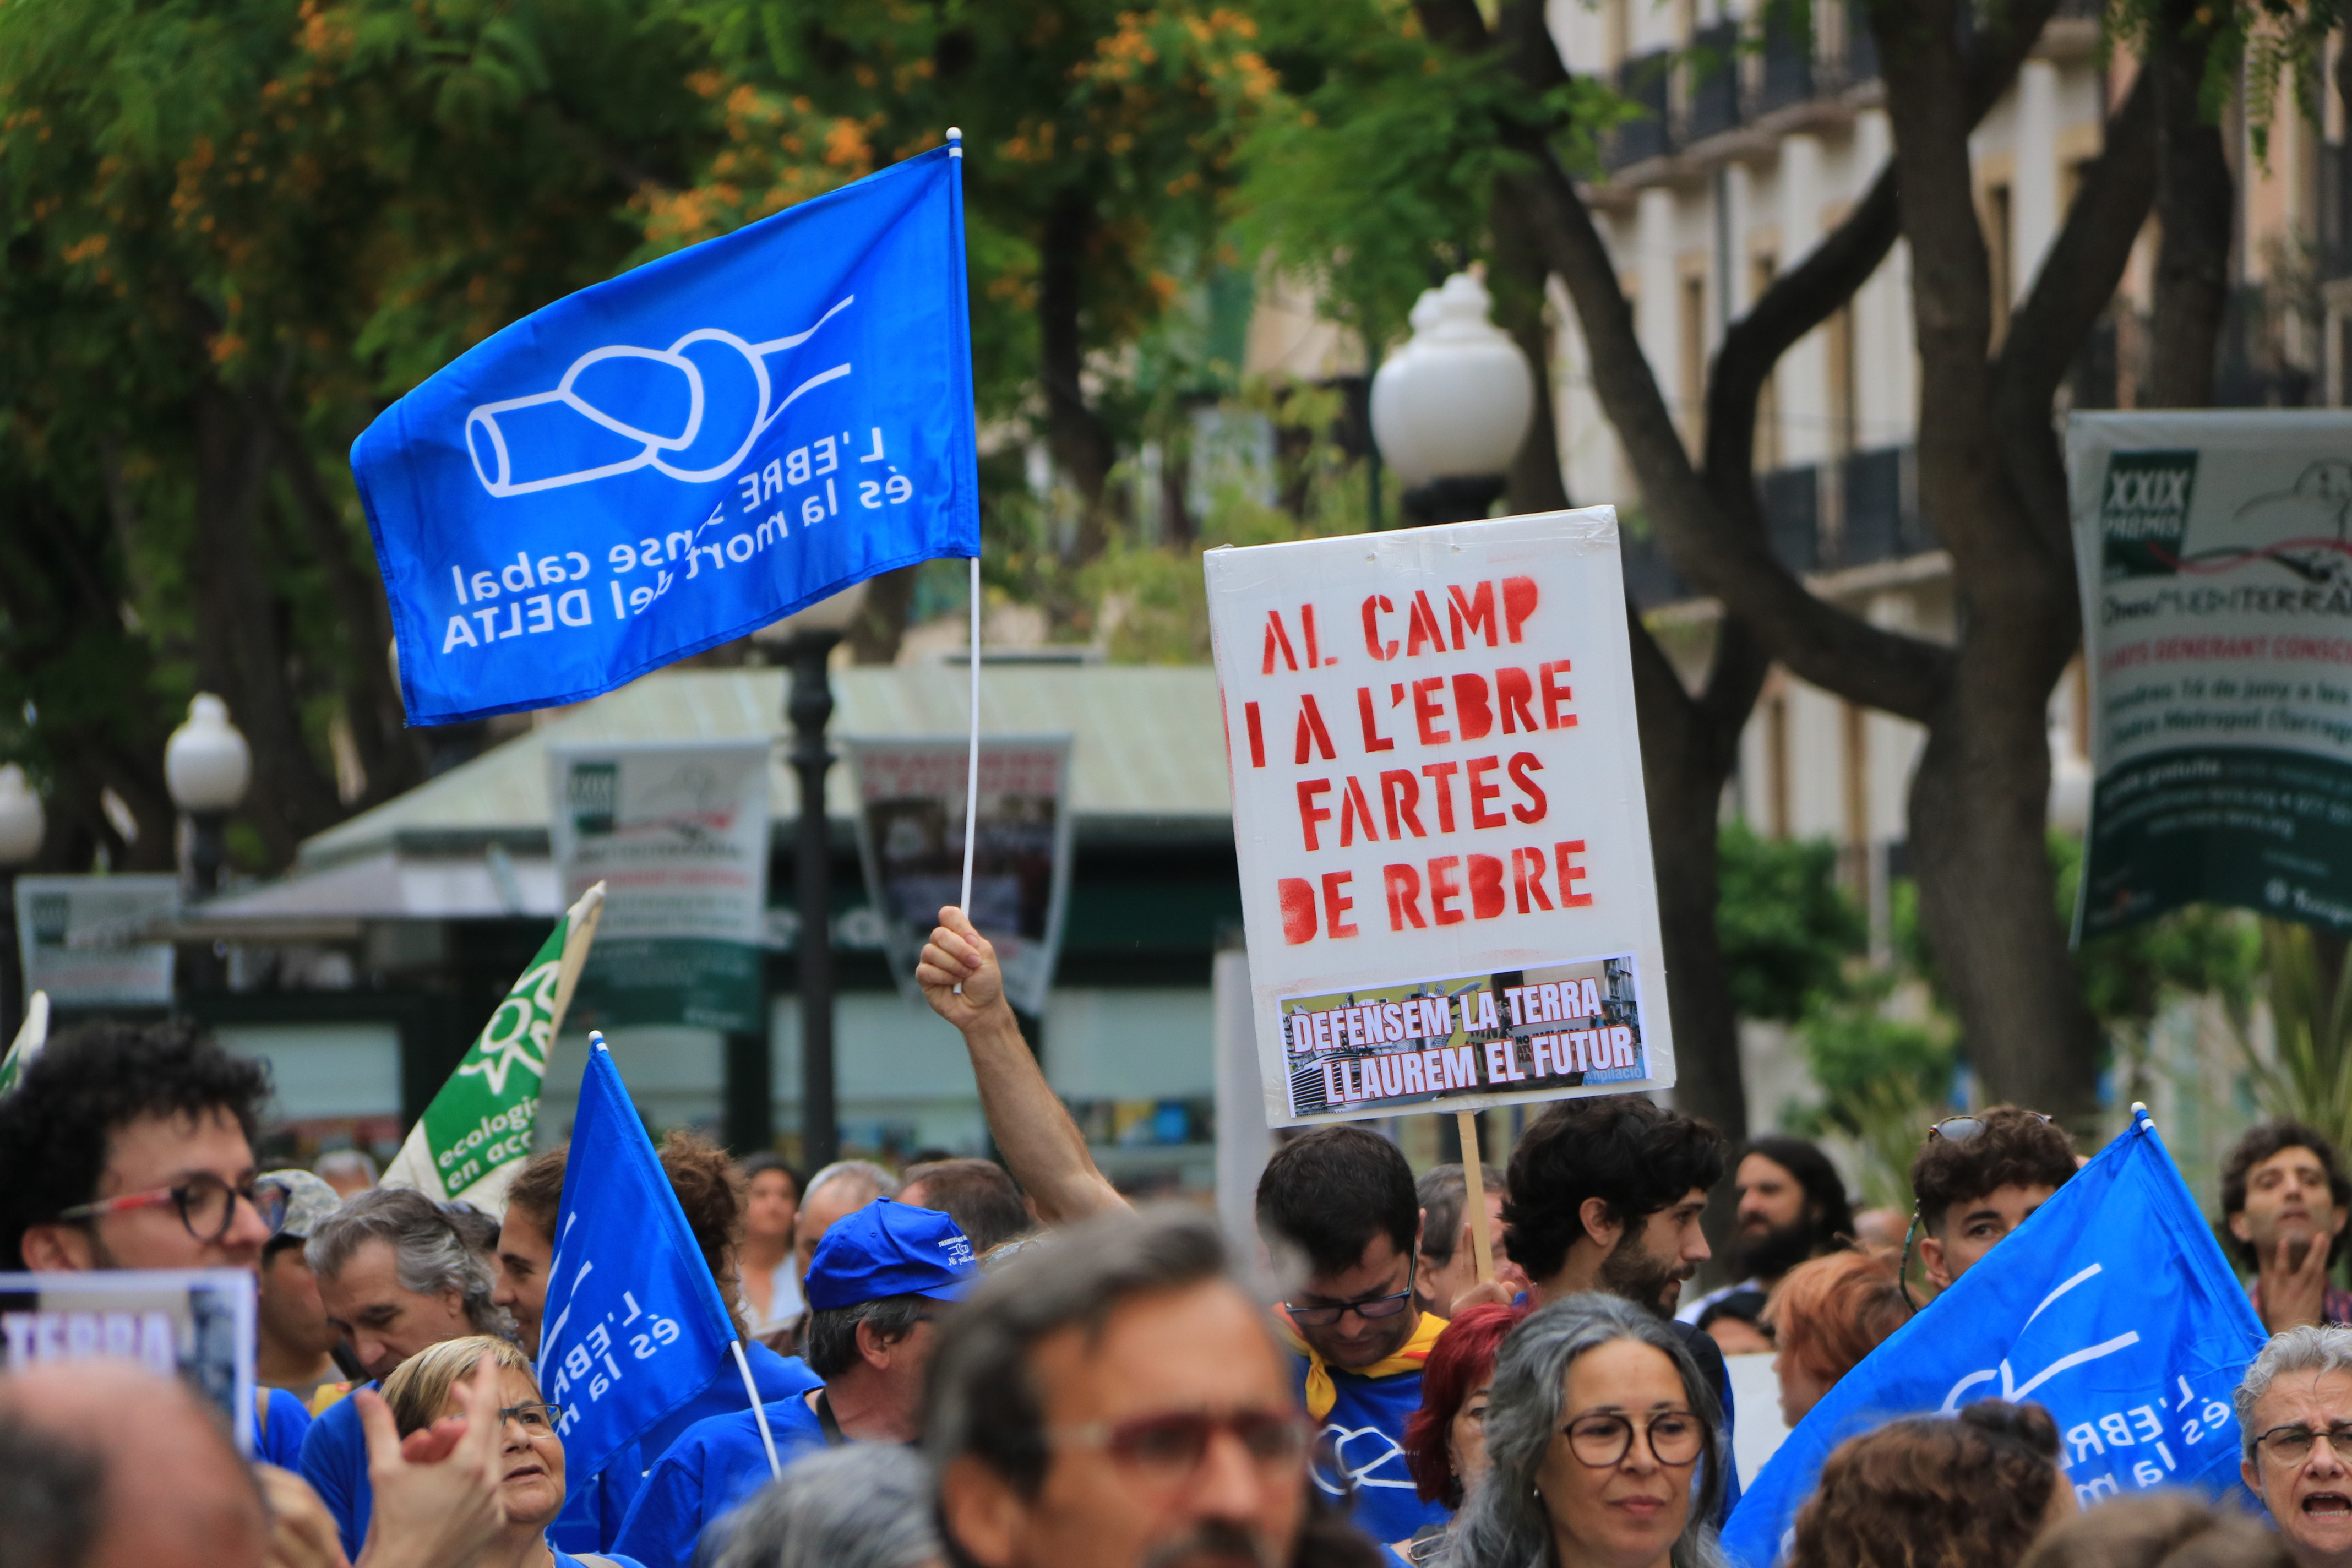 Groups demonstrate against the Hard Rock hotel-casino project on June 18, 2023 in Tarragona